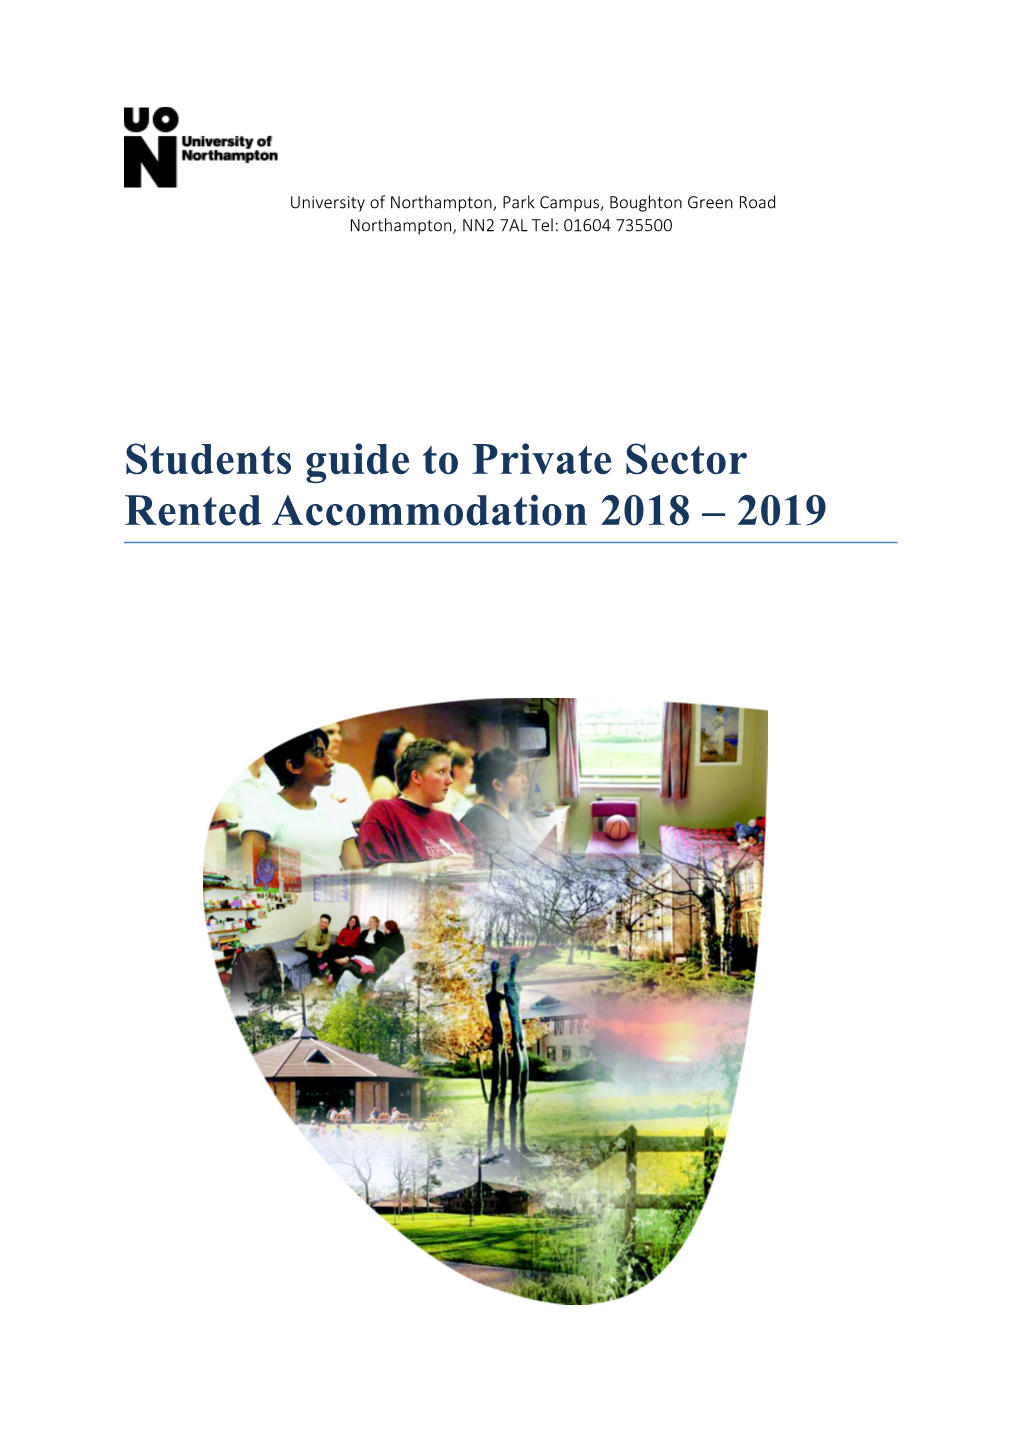 Students Guide to Private Sector Rented Accommodation 2018 2019